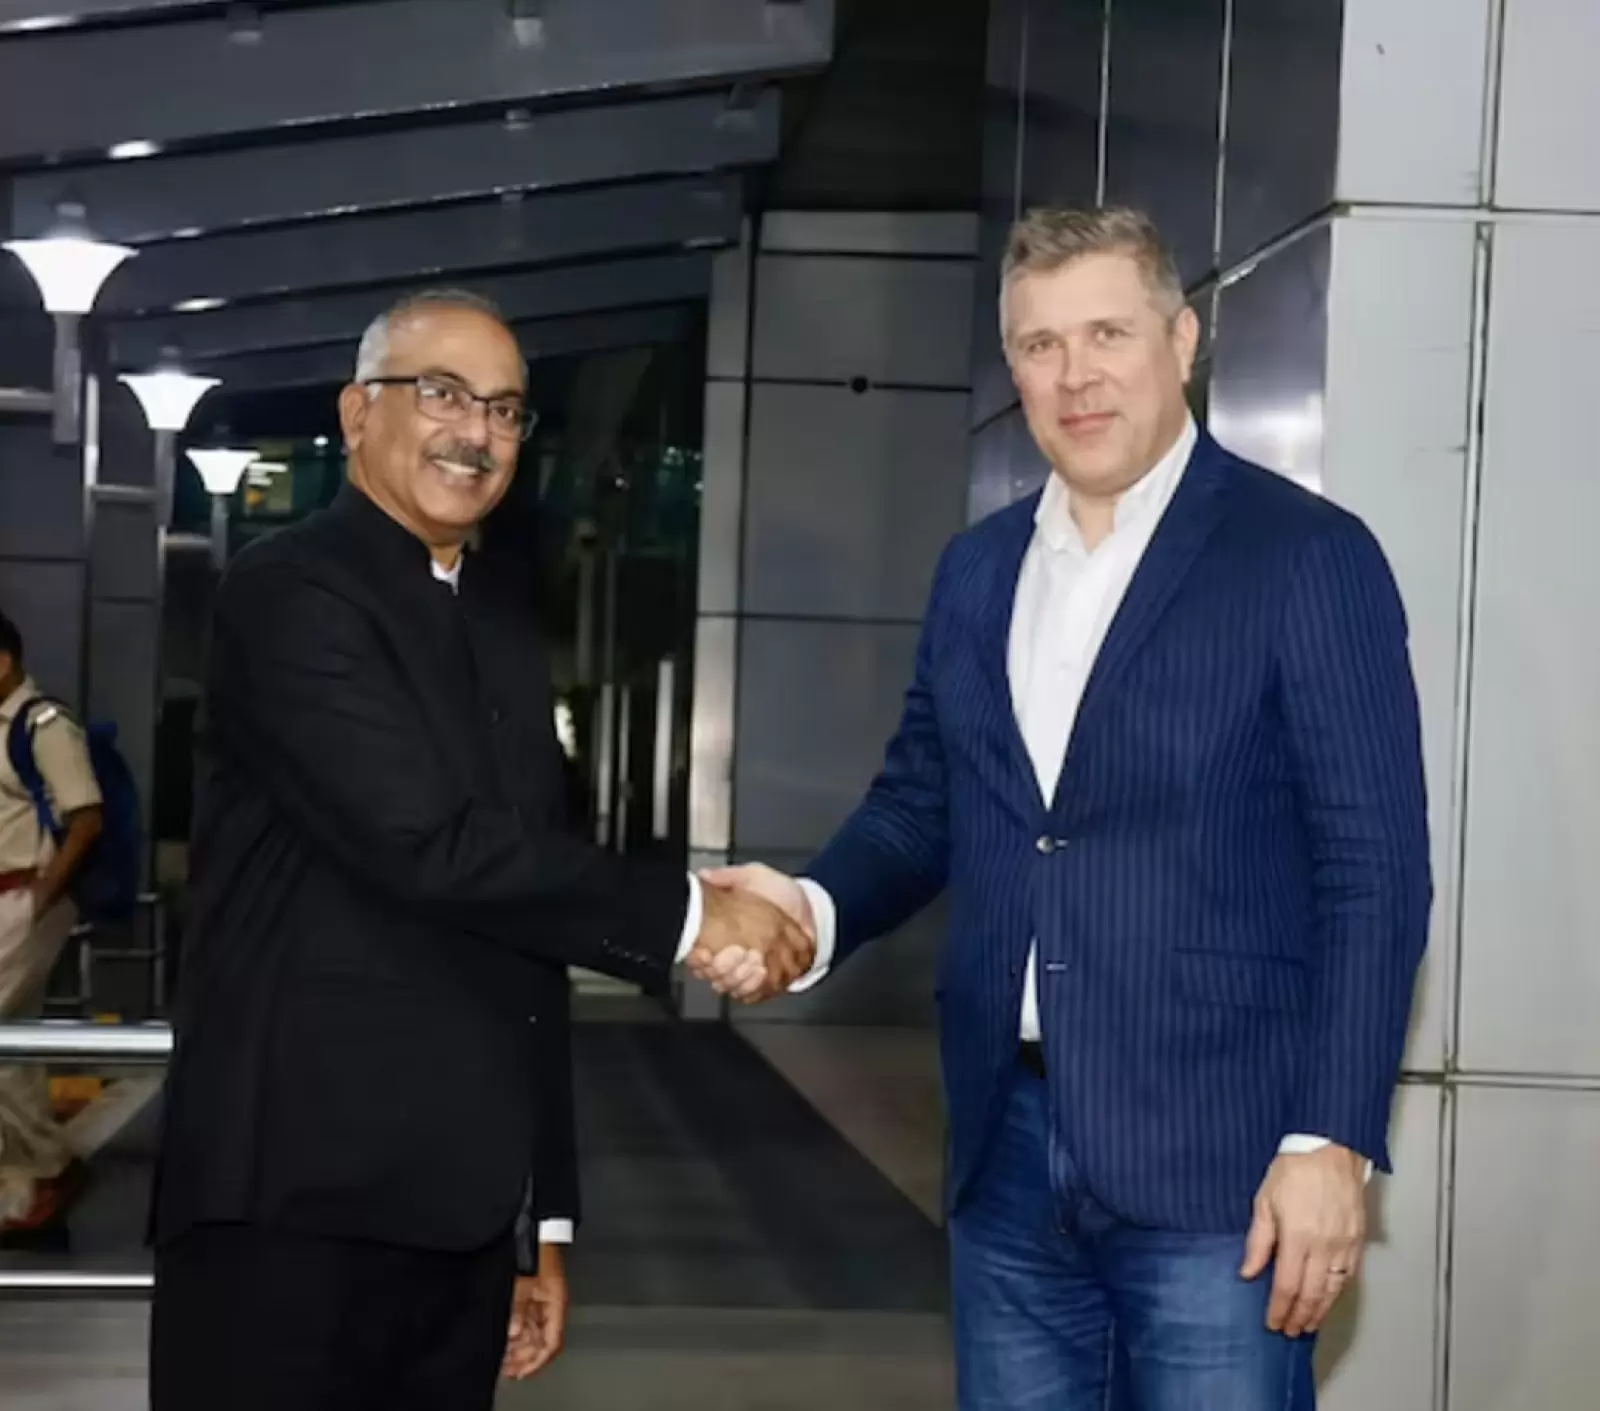 Iceland's Foreign Minister Bjarni Benediktsson arrives in Delhi; There will be talks on increasing trade and investment